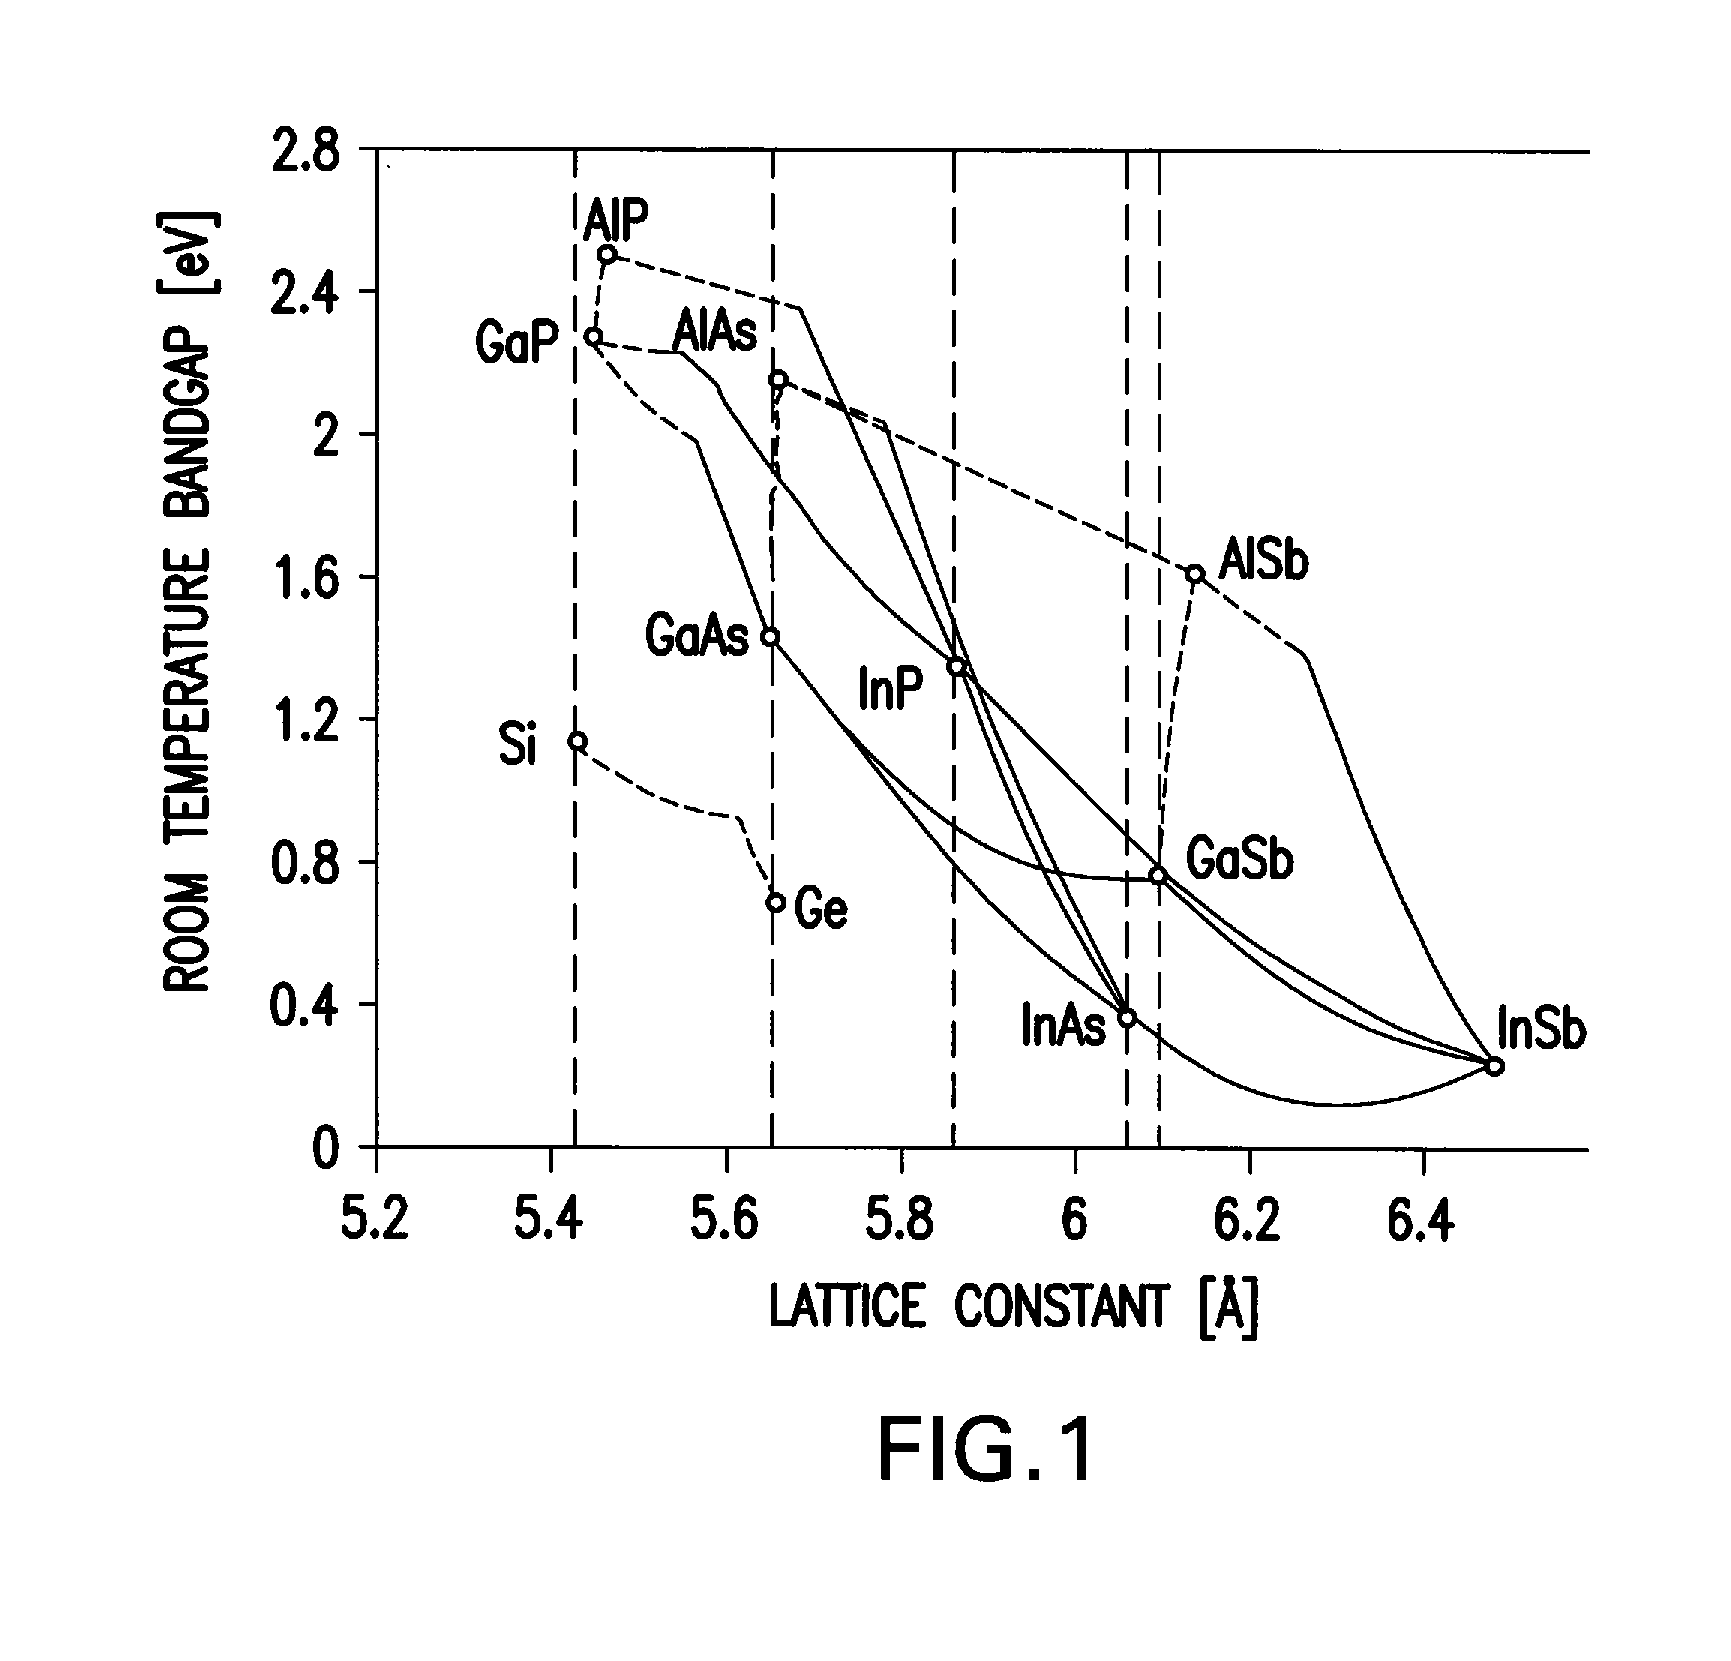 String interconnection and fabrication of inverted metamorphic multijunction solar cells